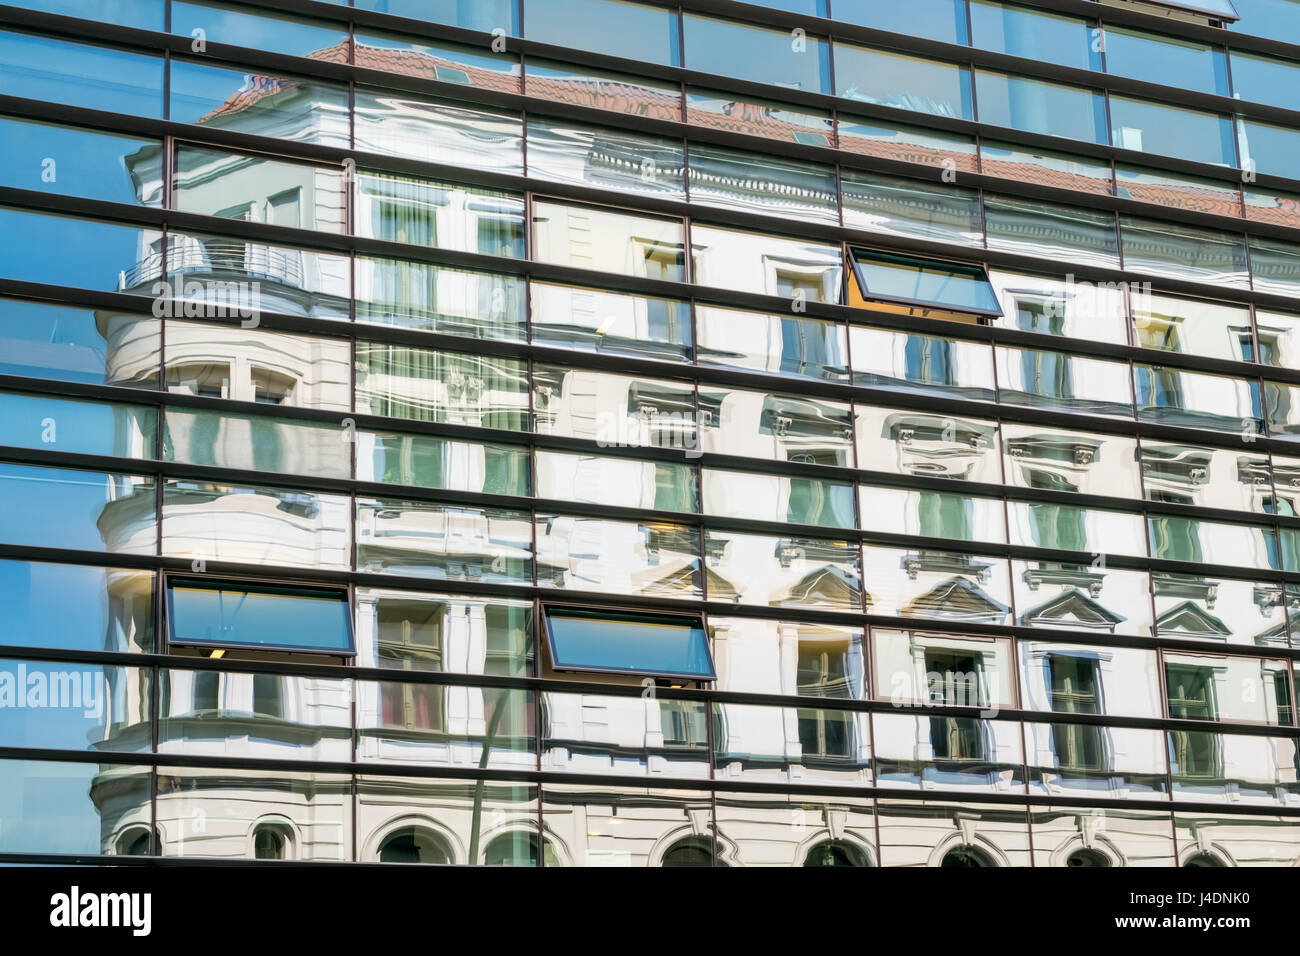 reflection of old building in modern glass facade Stock Photo